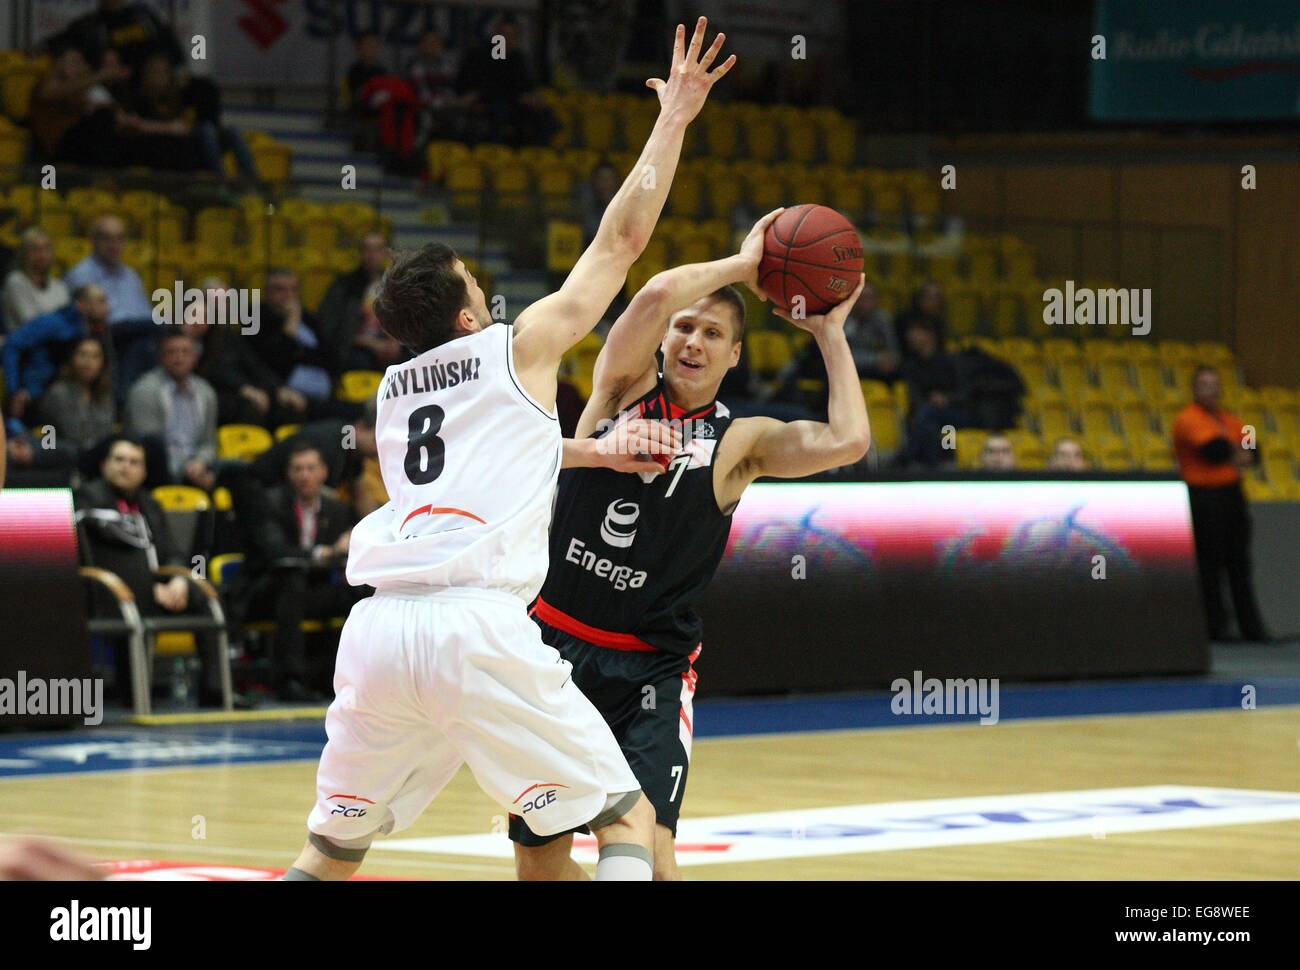 Gdynia, Poland. 19th February, 2015. Basketball: Cup of Poland final games. PGE Turow Zgorzelec faces energa Czarni Slupsk at Gdynia Arena sports hall. Tomasz Snieg (7) in action against Michal Chylinski (8) during the game Credit:  Michal Fludra/Alamy Live News Stock Photo